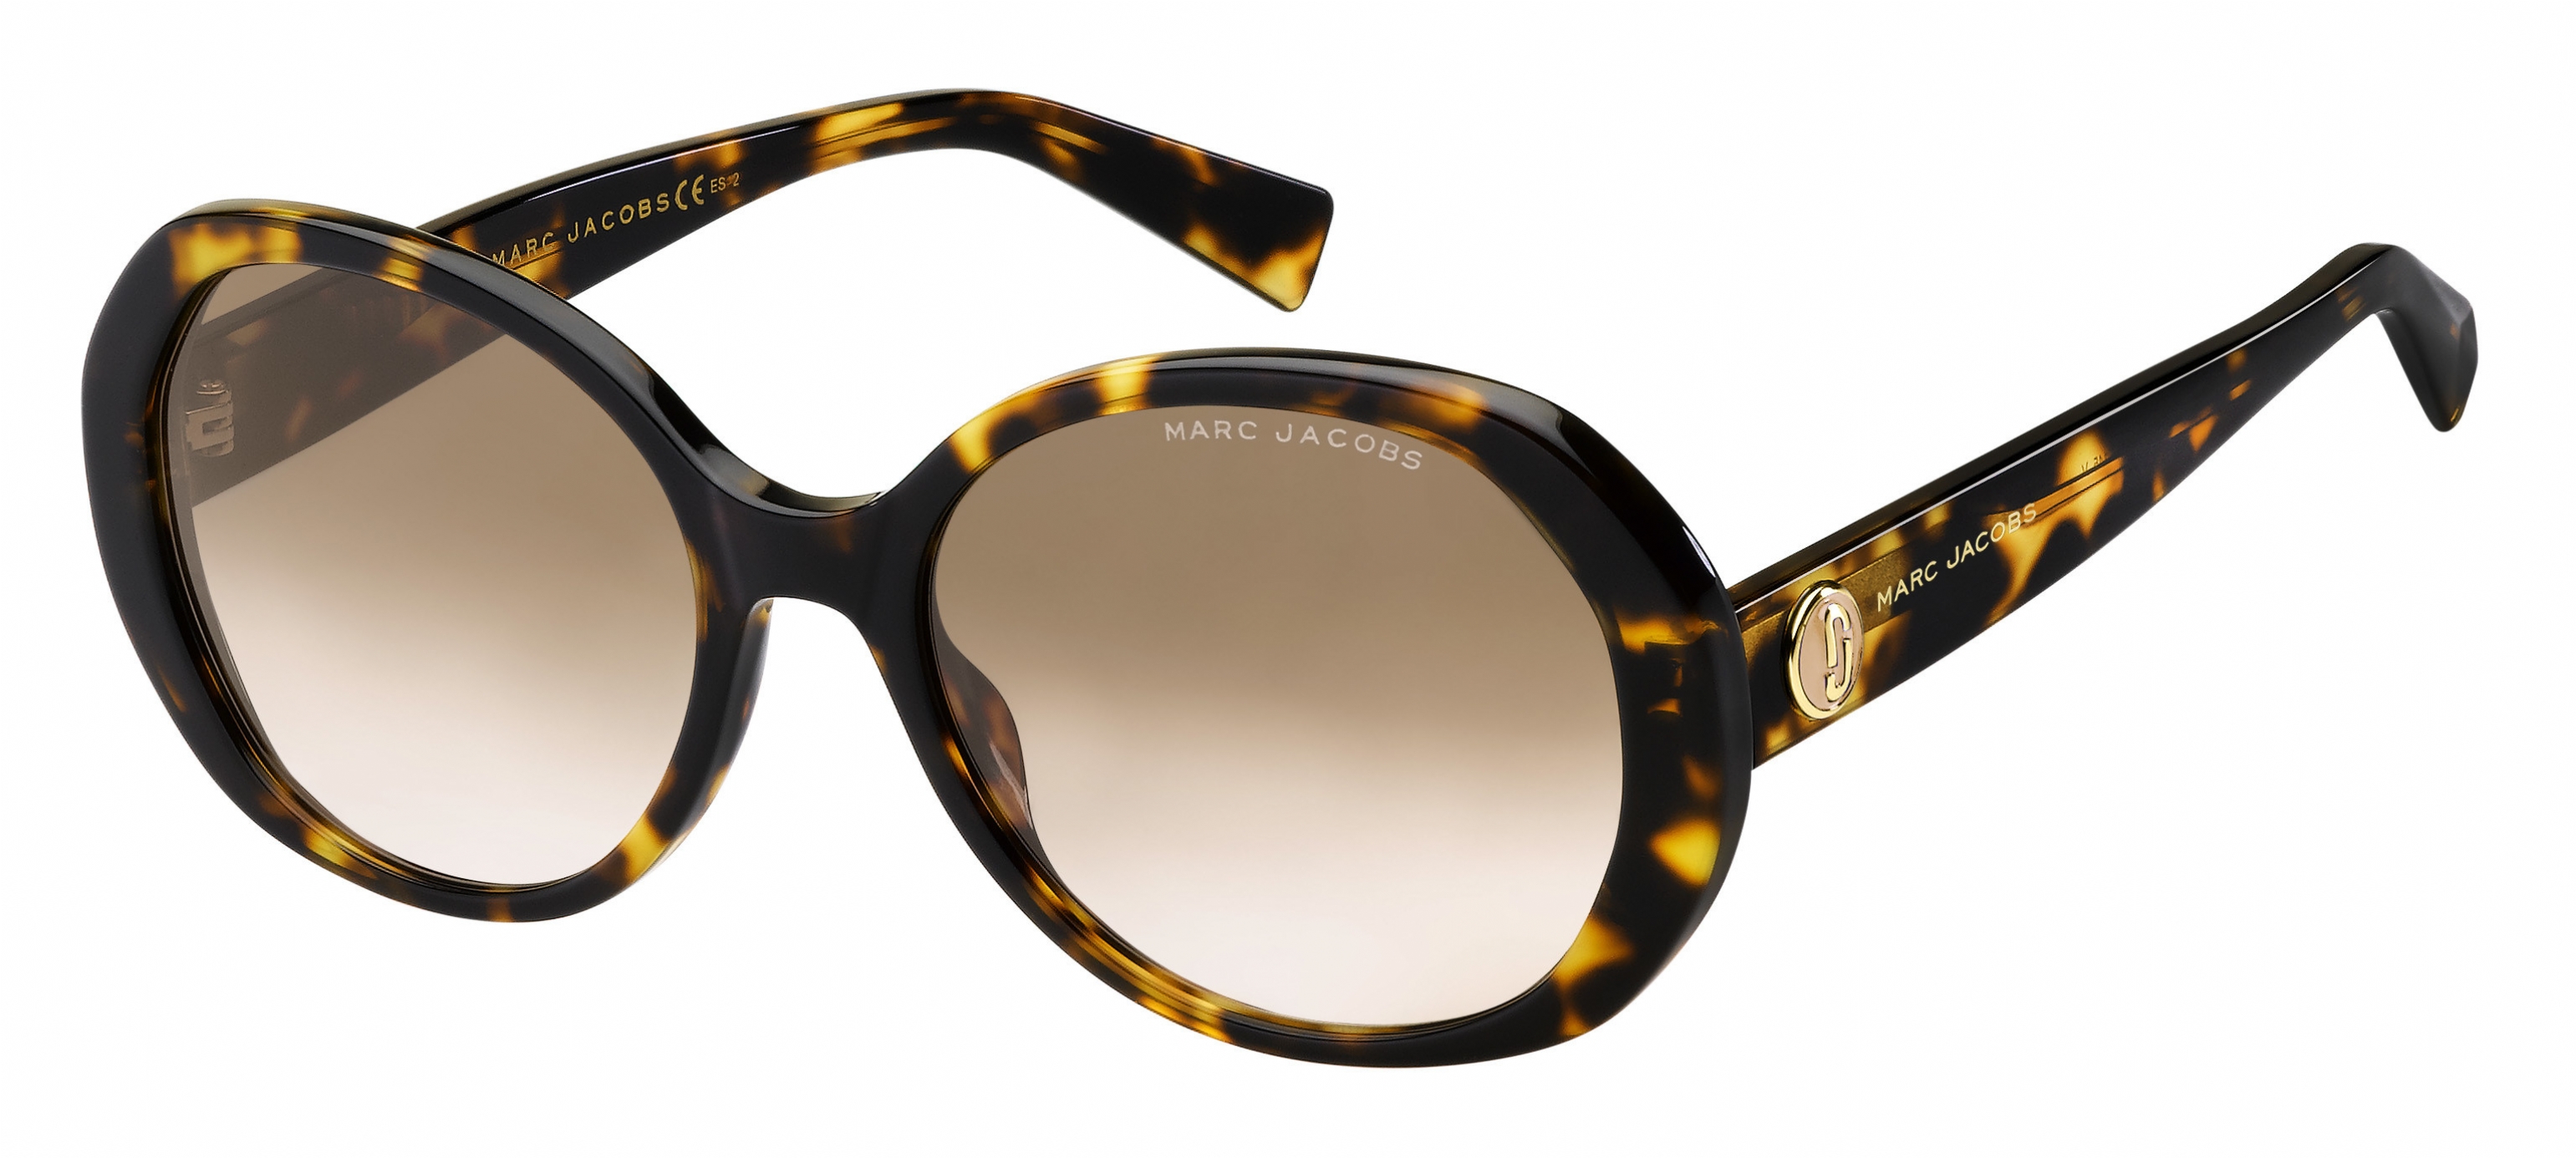 Buy Marc Jacobs Sunglasses directly from OpticsFast.com